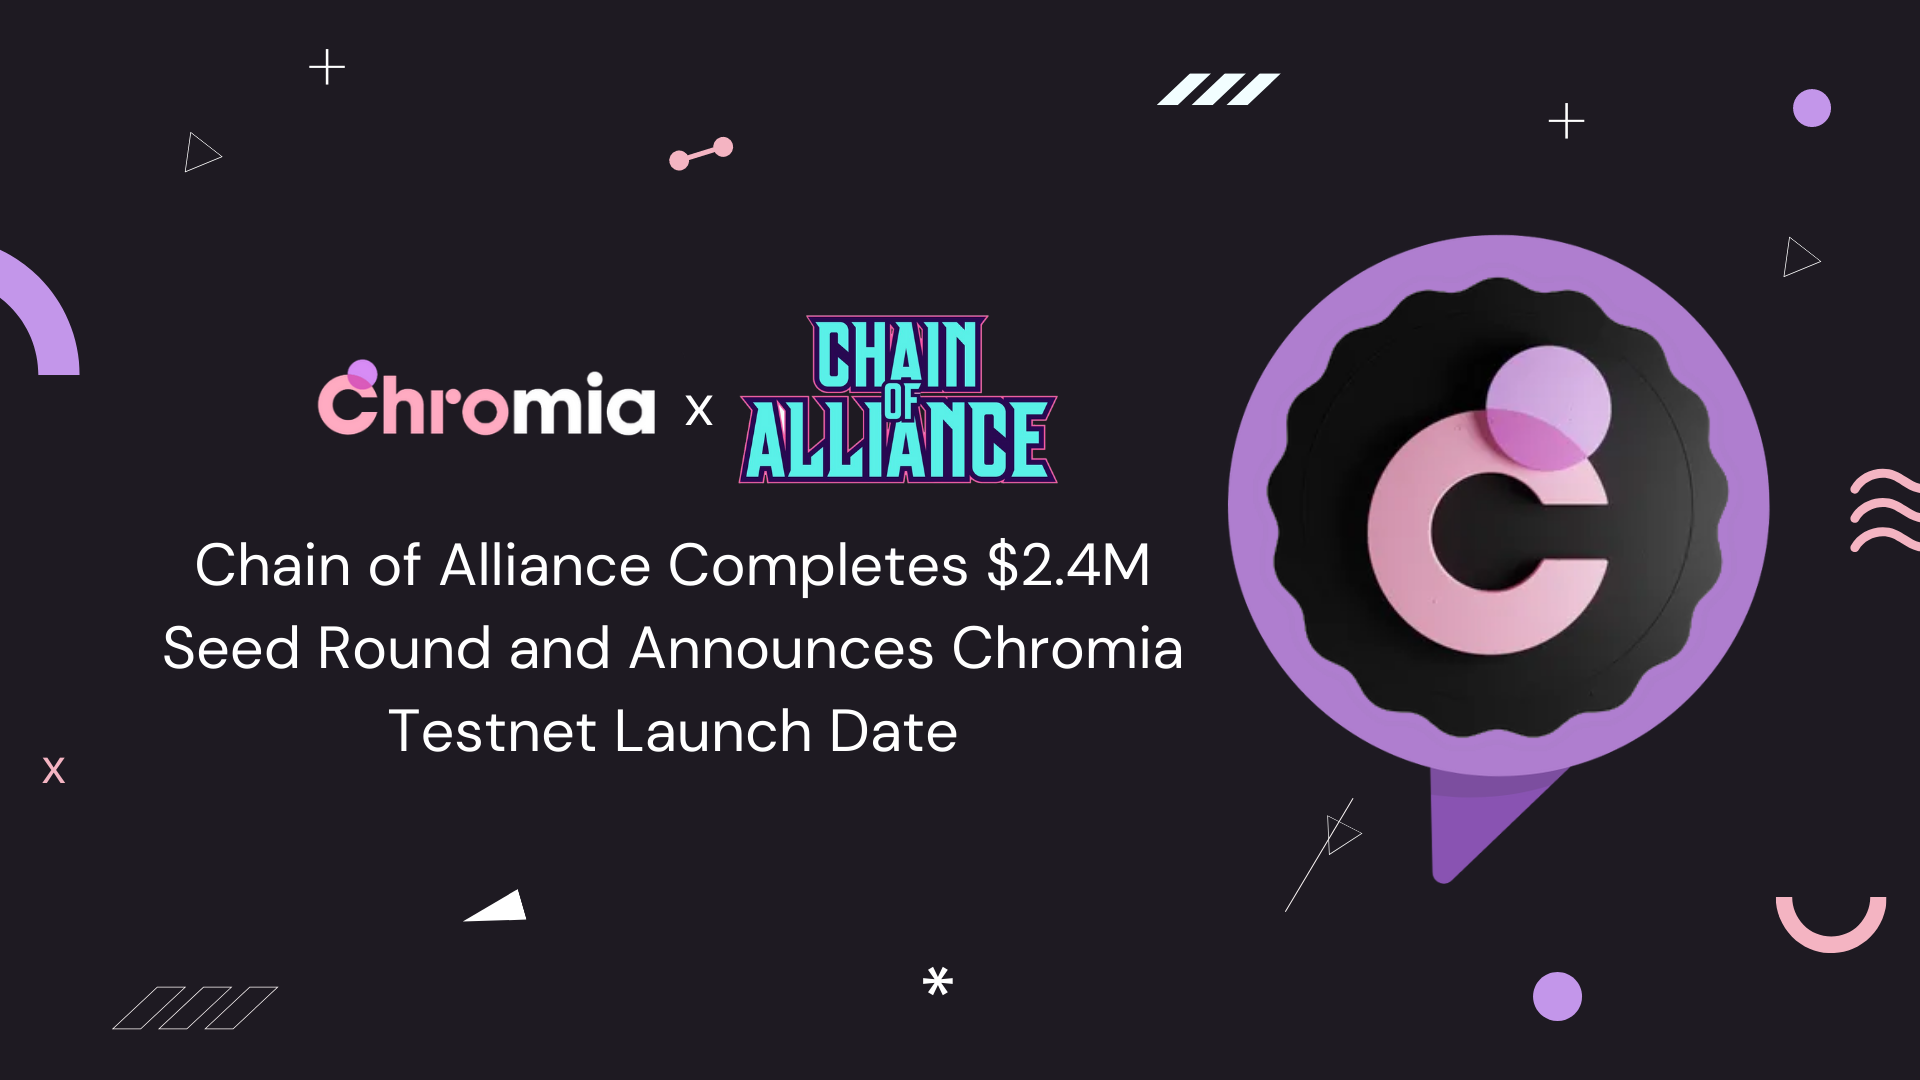 Chain of Alliance Completes $2.4M Seed Round and Announces Chromia Testnet Launch Date